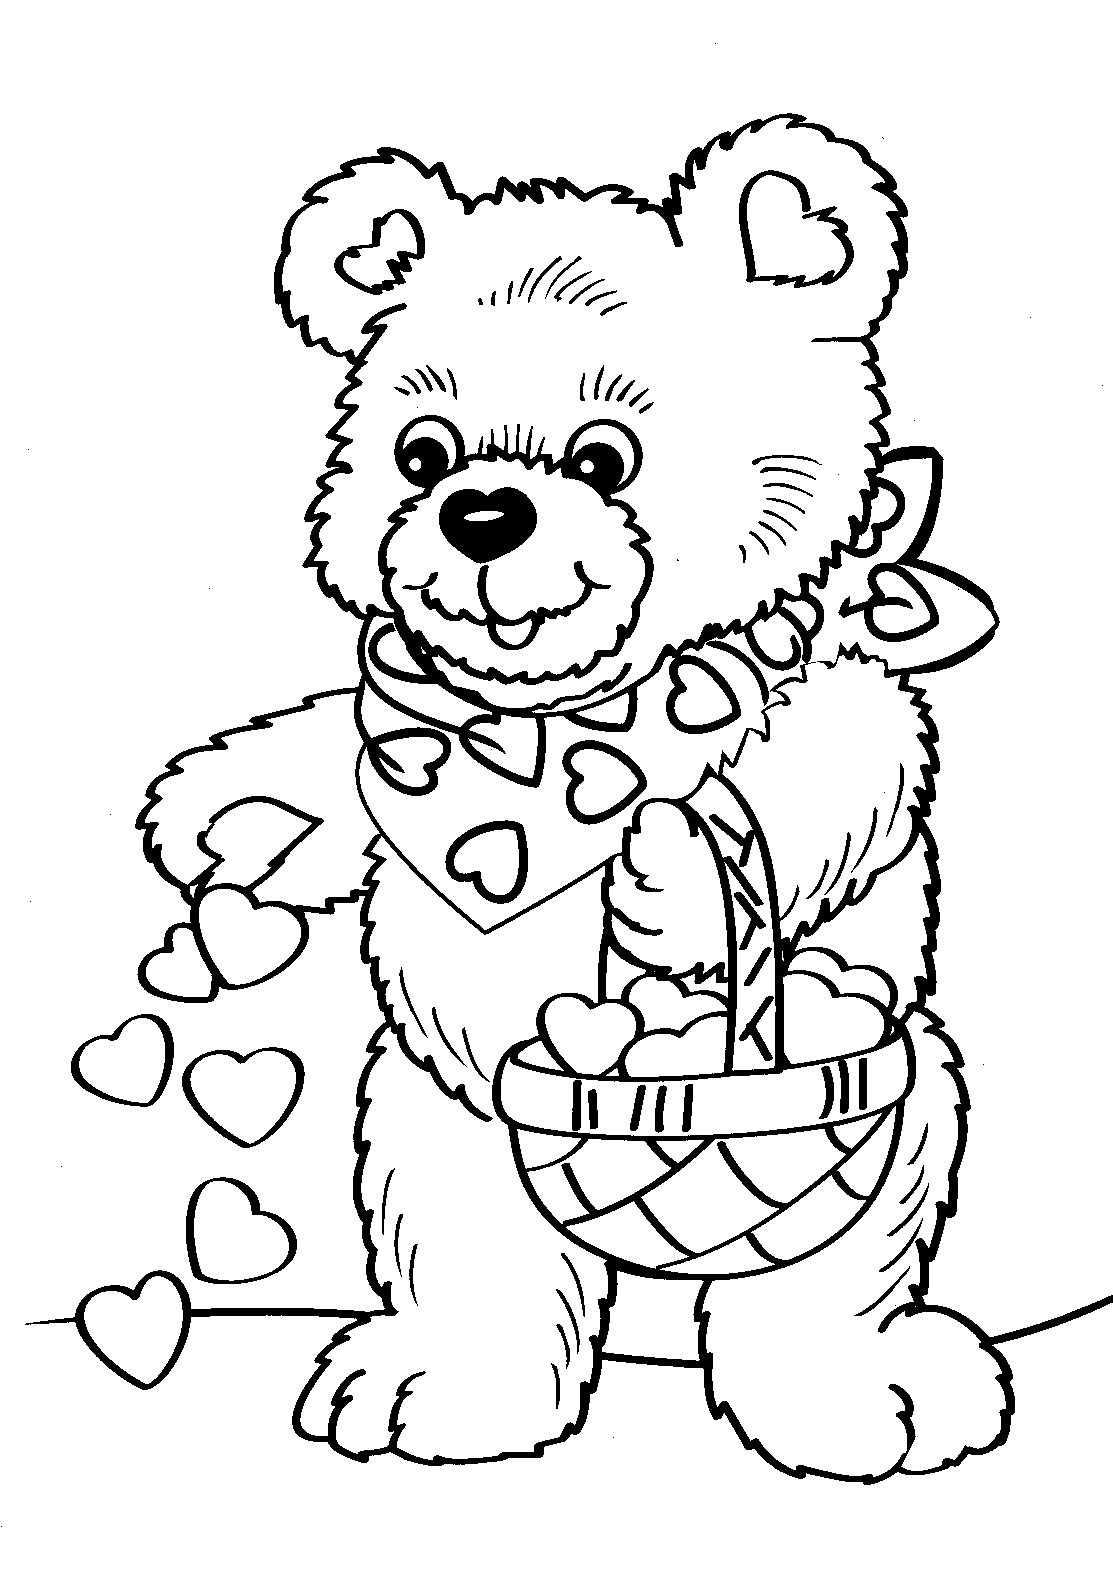 Valentine Coloring Page Valentine Heart Coloring Pages Best Coloring Pages For Kids